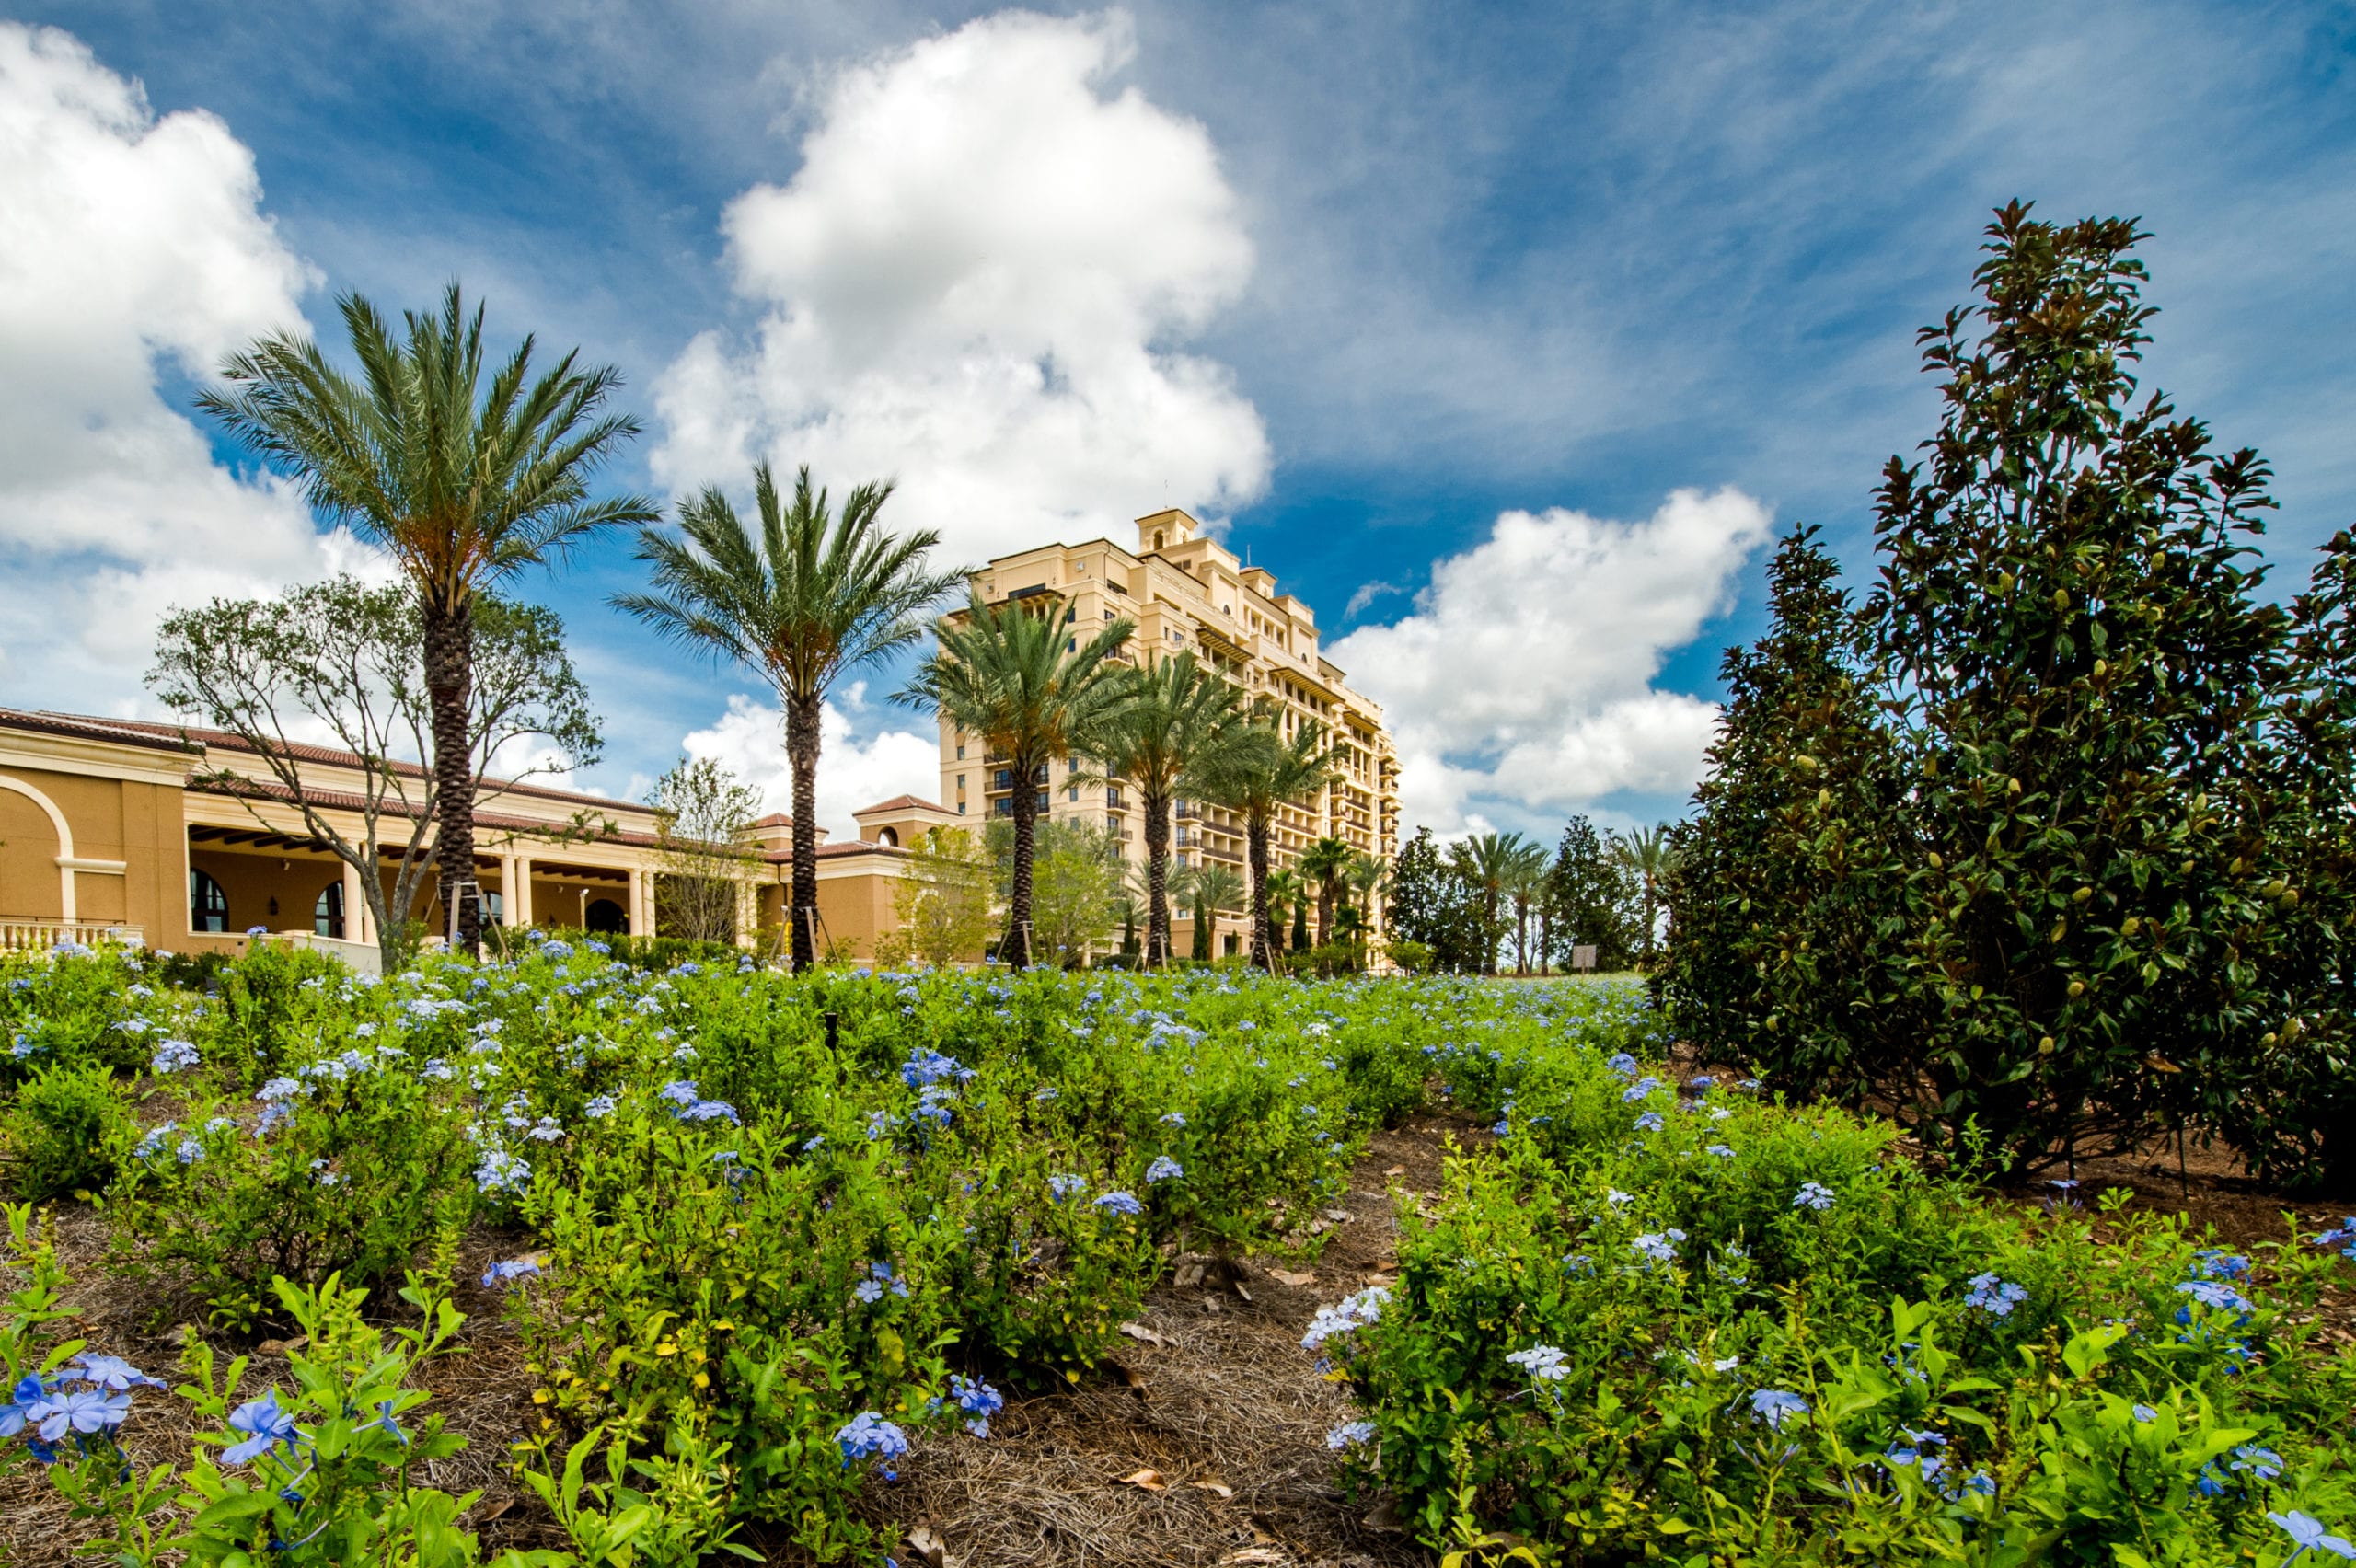 Four Seasons Building by flowers under blue cloudy skies with palm trees